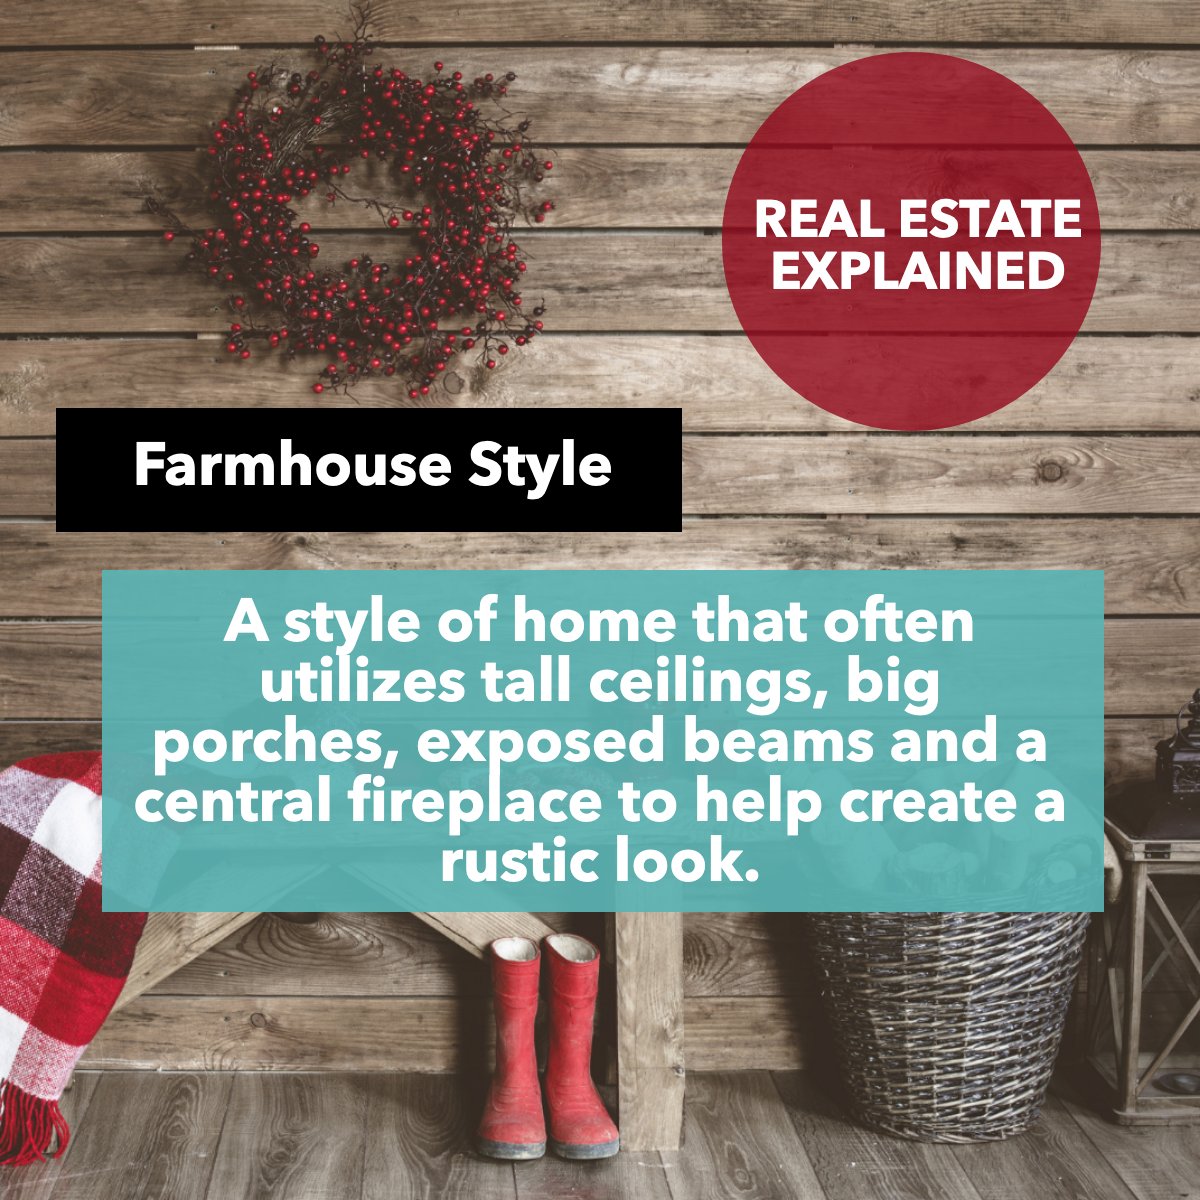 Did you know what a Farmhouse Style is? 🏡

Is this the type of house that you like?

#farmhousestylehome #farmhousestyledesign #farmhousestyleinspired #farmhouseismystyle
 #L2Lsocials